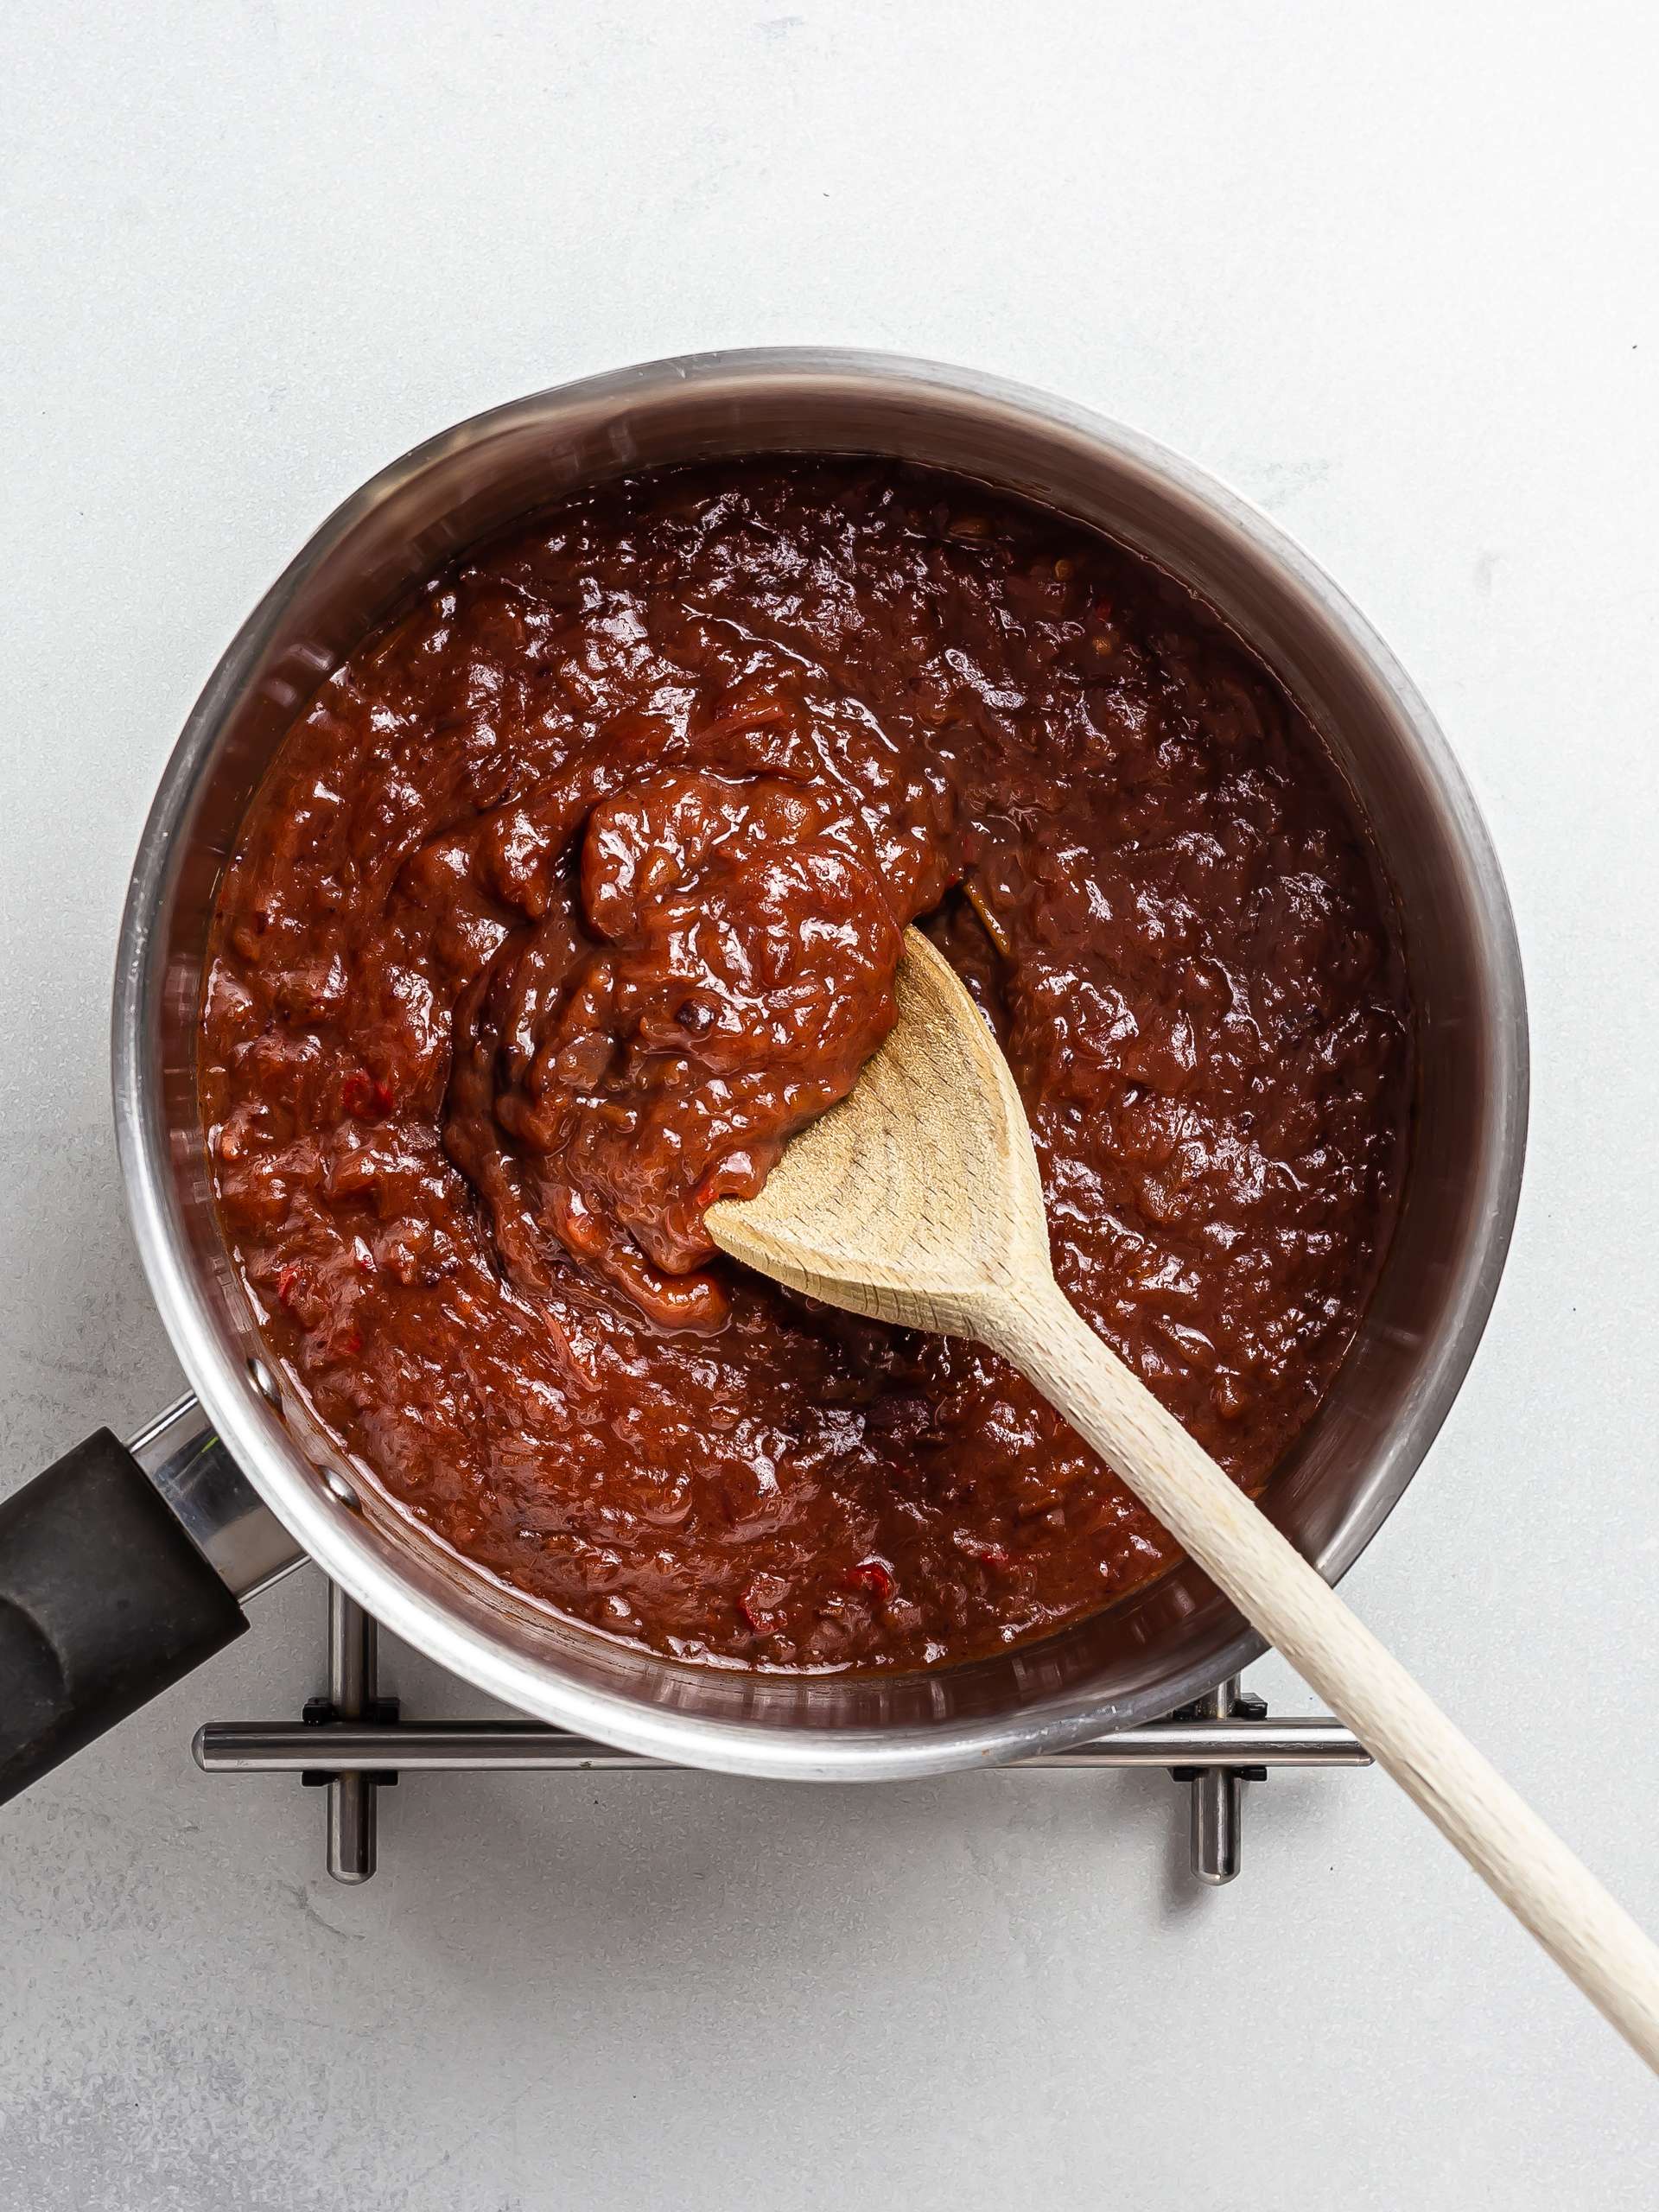 plum chutney cooking in a pot